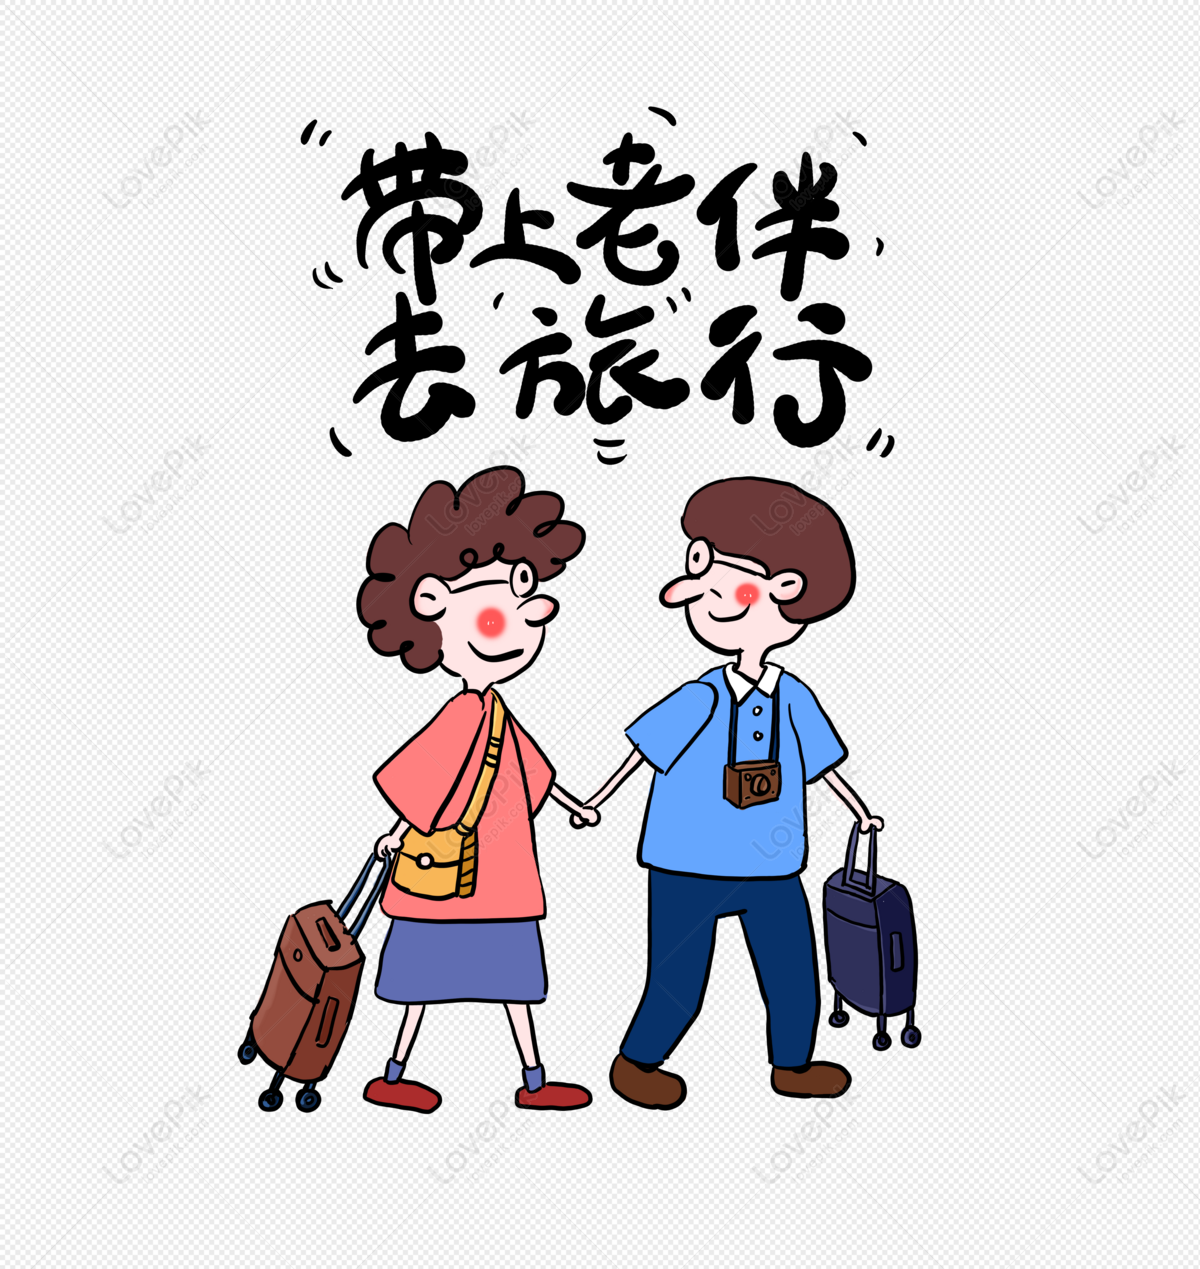 Couple travel cartoon hand drawn characters, chinese couple, couple walking, people travel png image